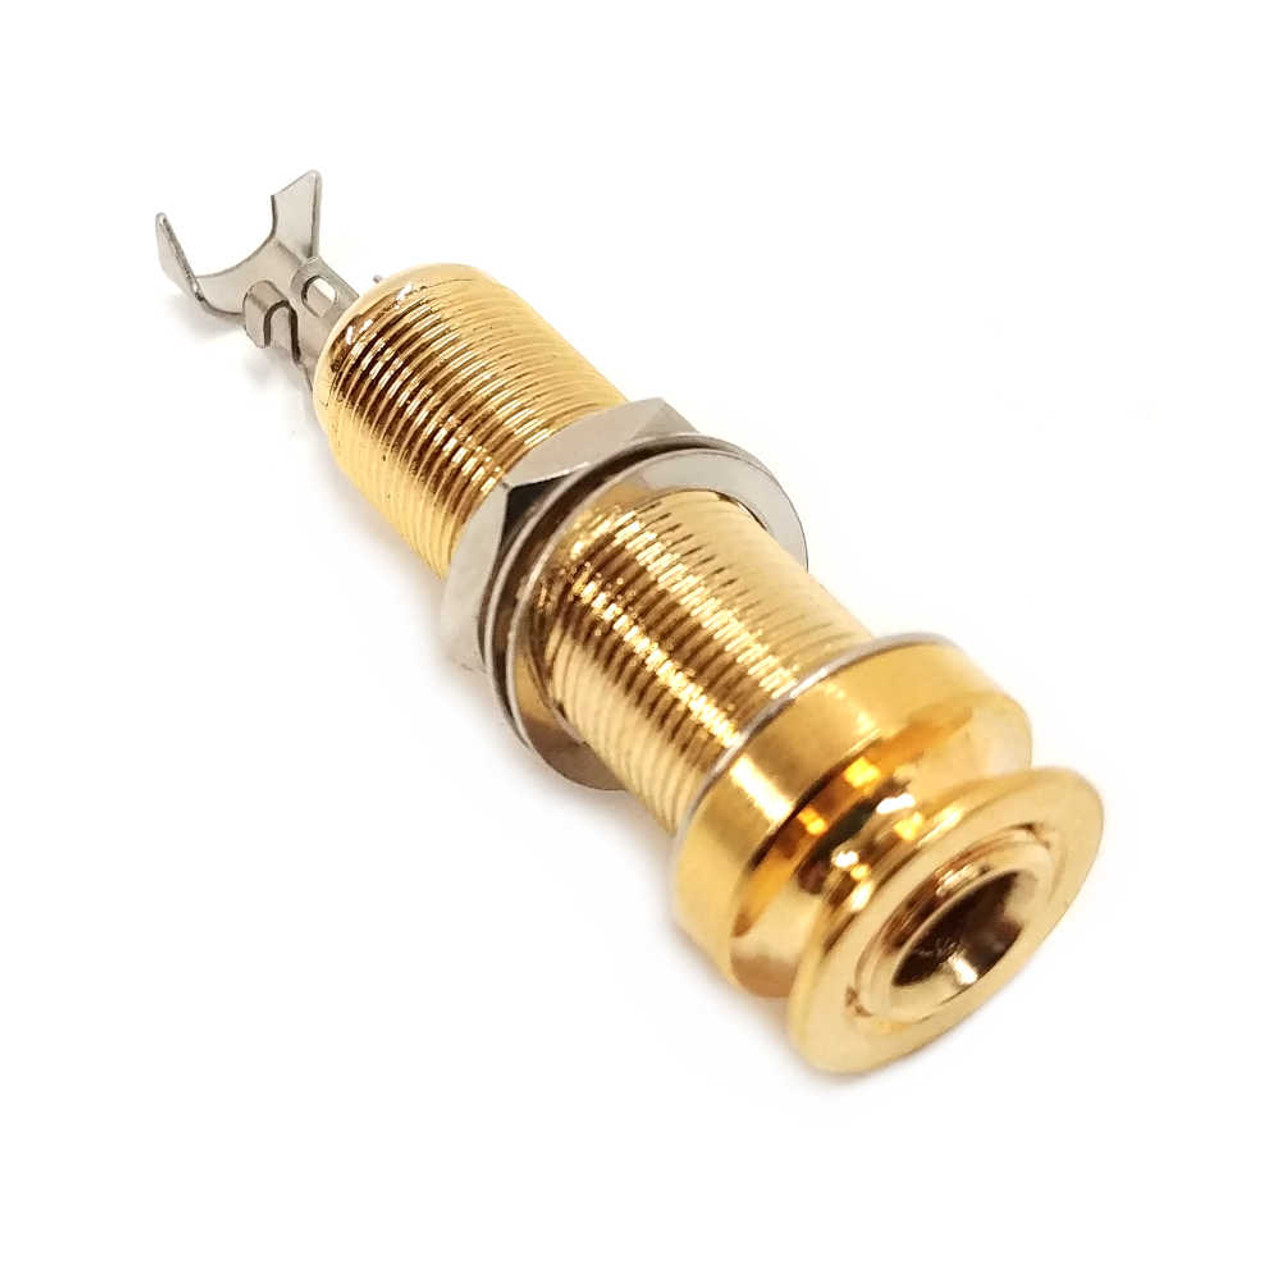 Endpin Jack - 1/4" Stereo Gold